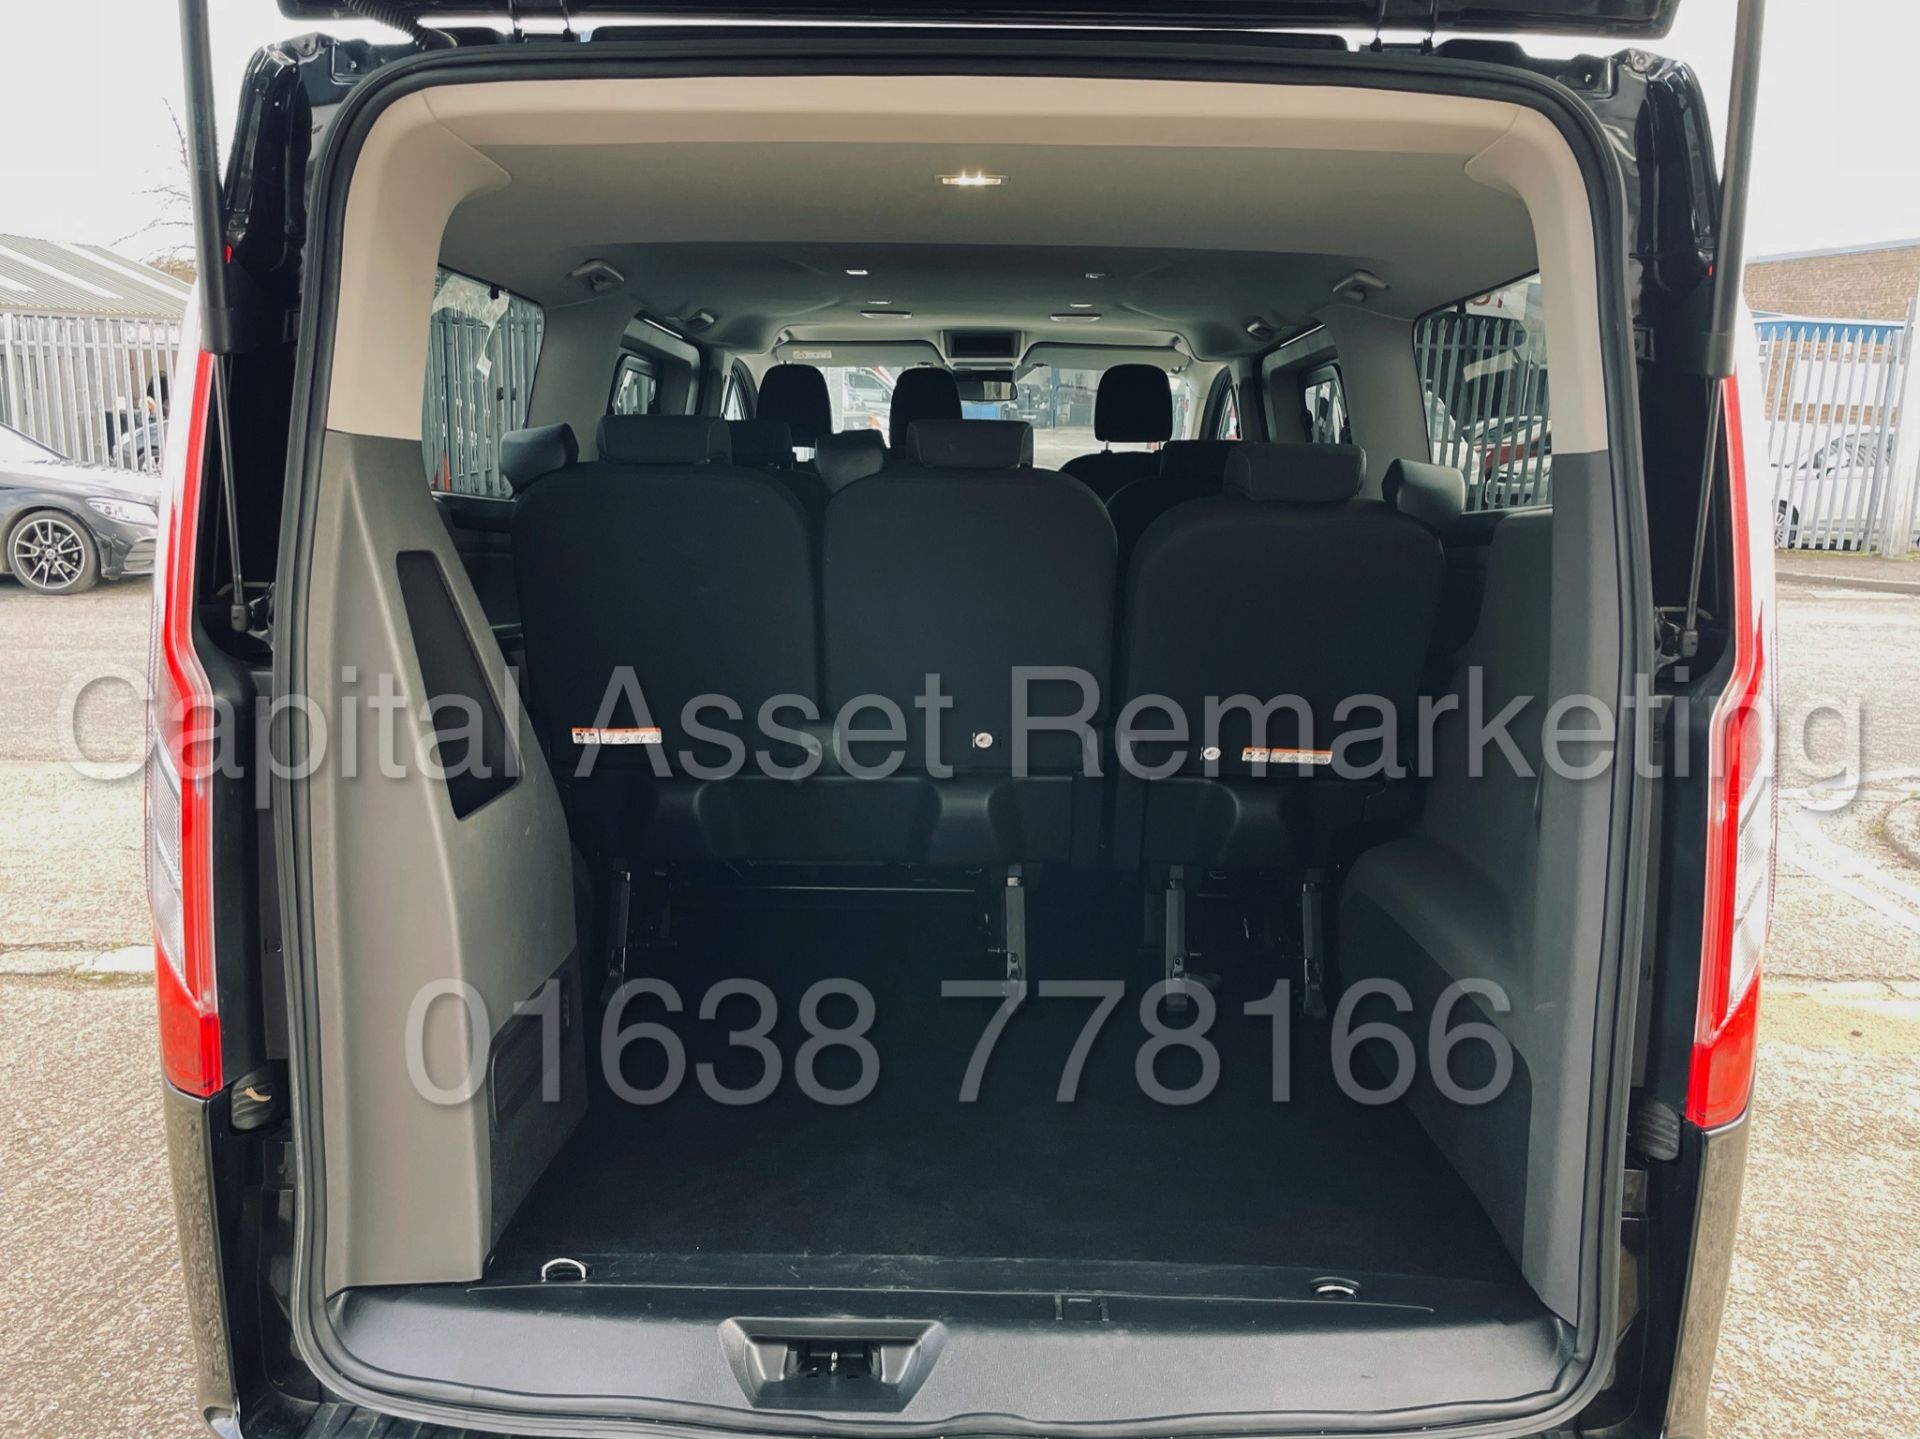 (On Sale) FORD TRANSIT CUSTOM TOURNEO *9 SEATER MPV / BUS* (2019) '2.0 TDCI - 130 BHP' (1 OWNER) - Image 25 of 46